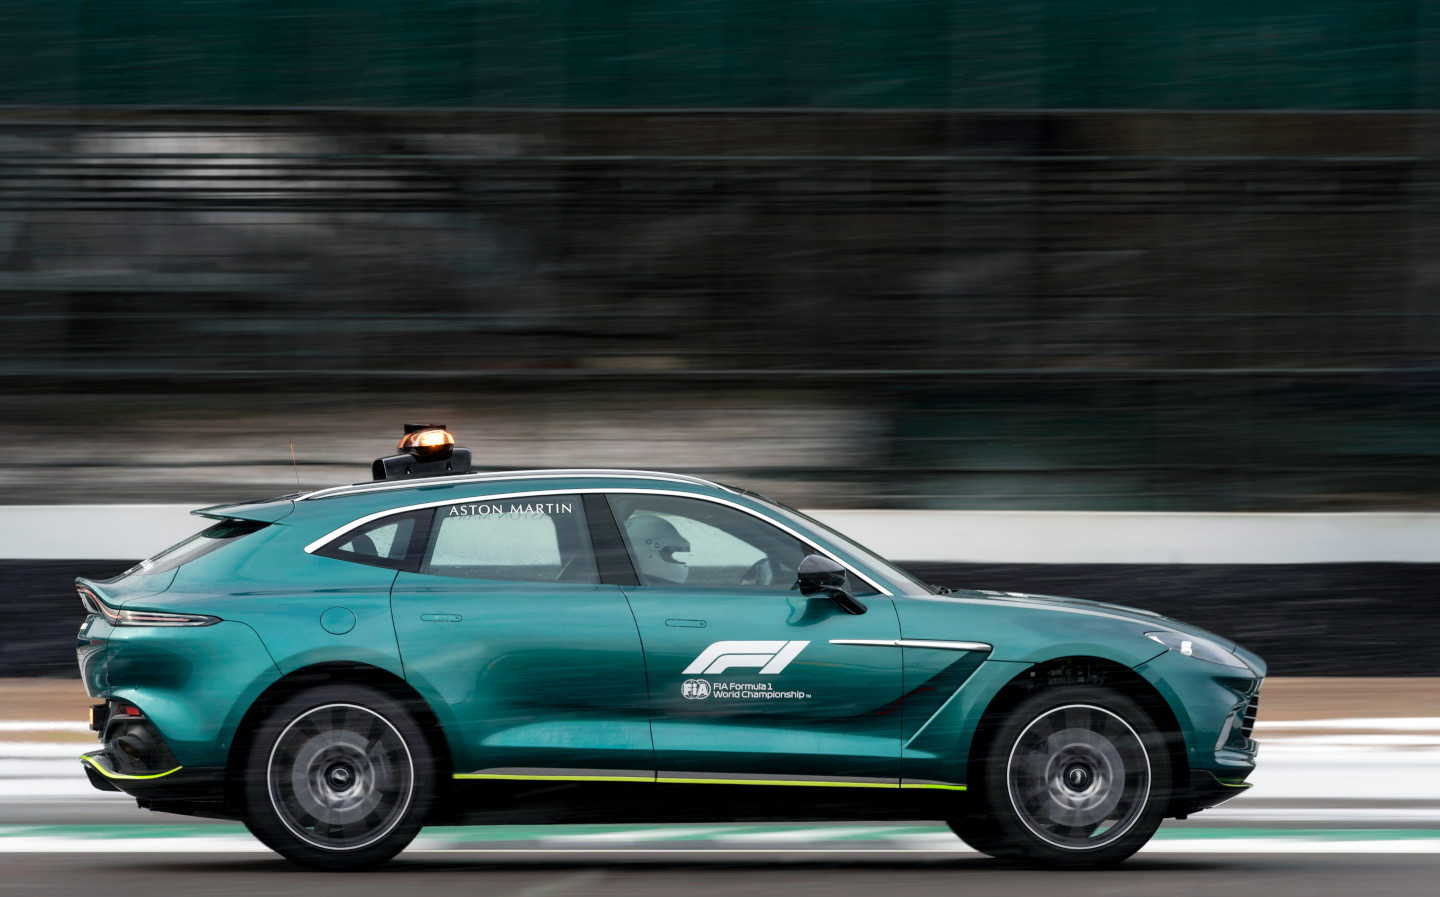 Aston Martin to provide F1 safety cars for 2021